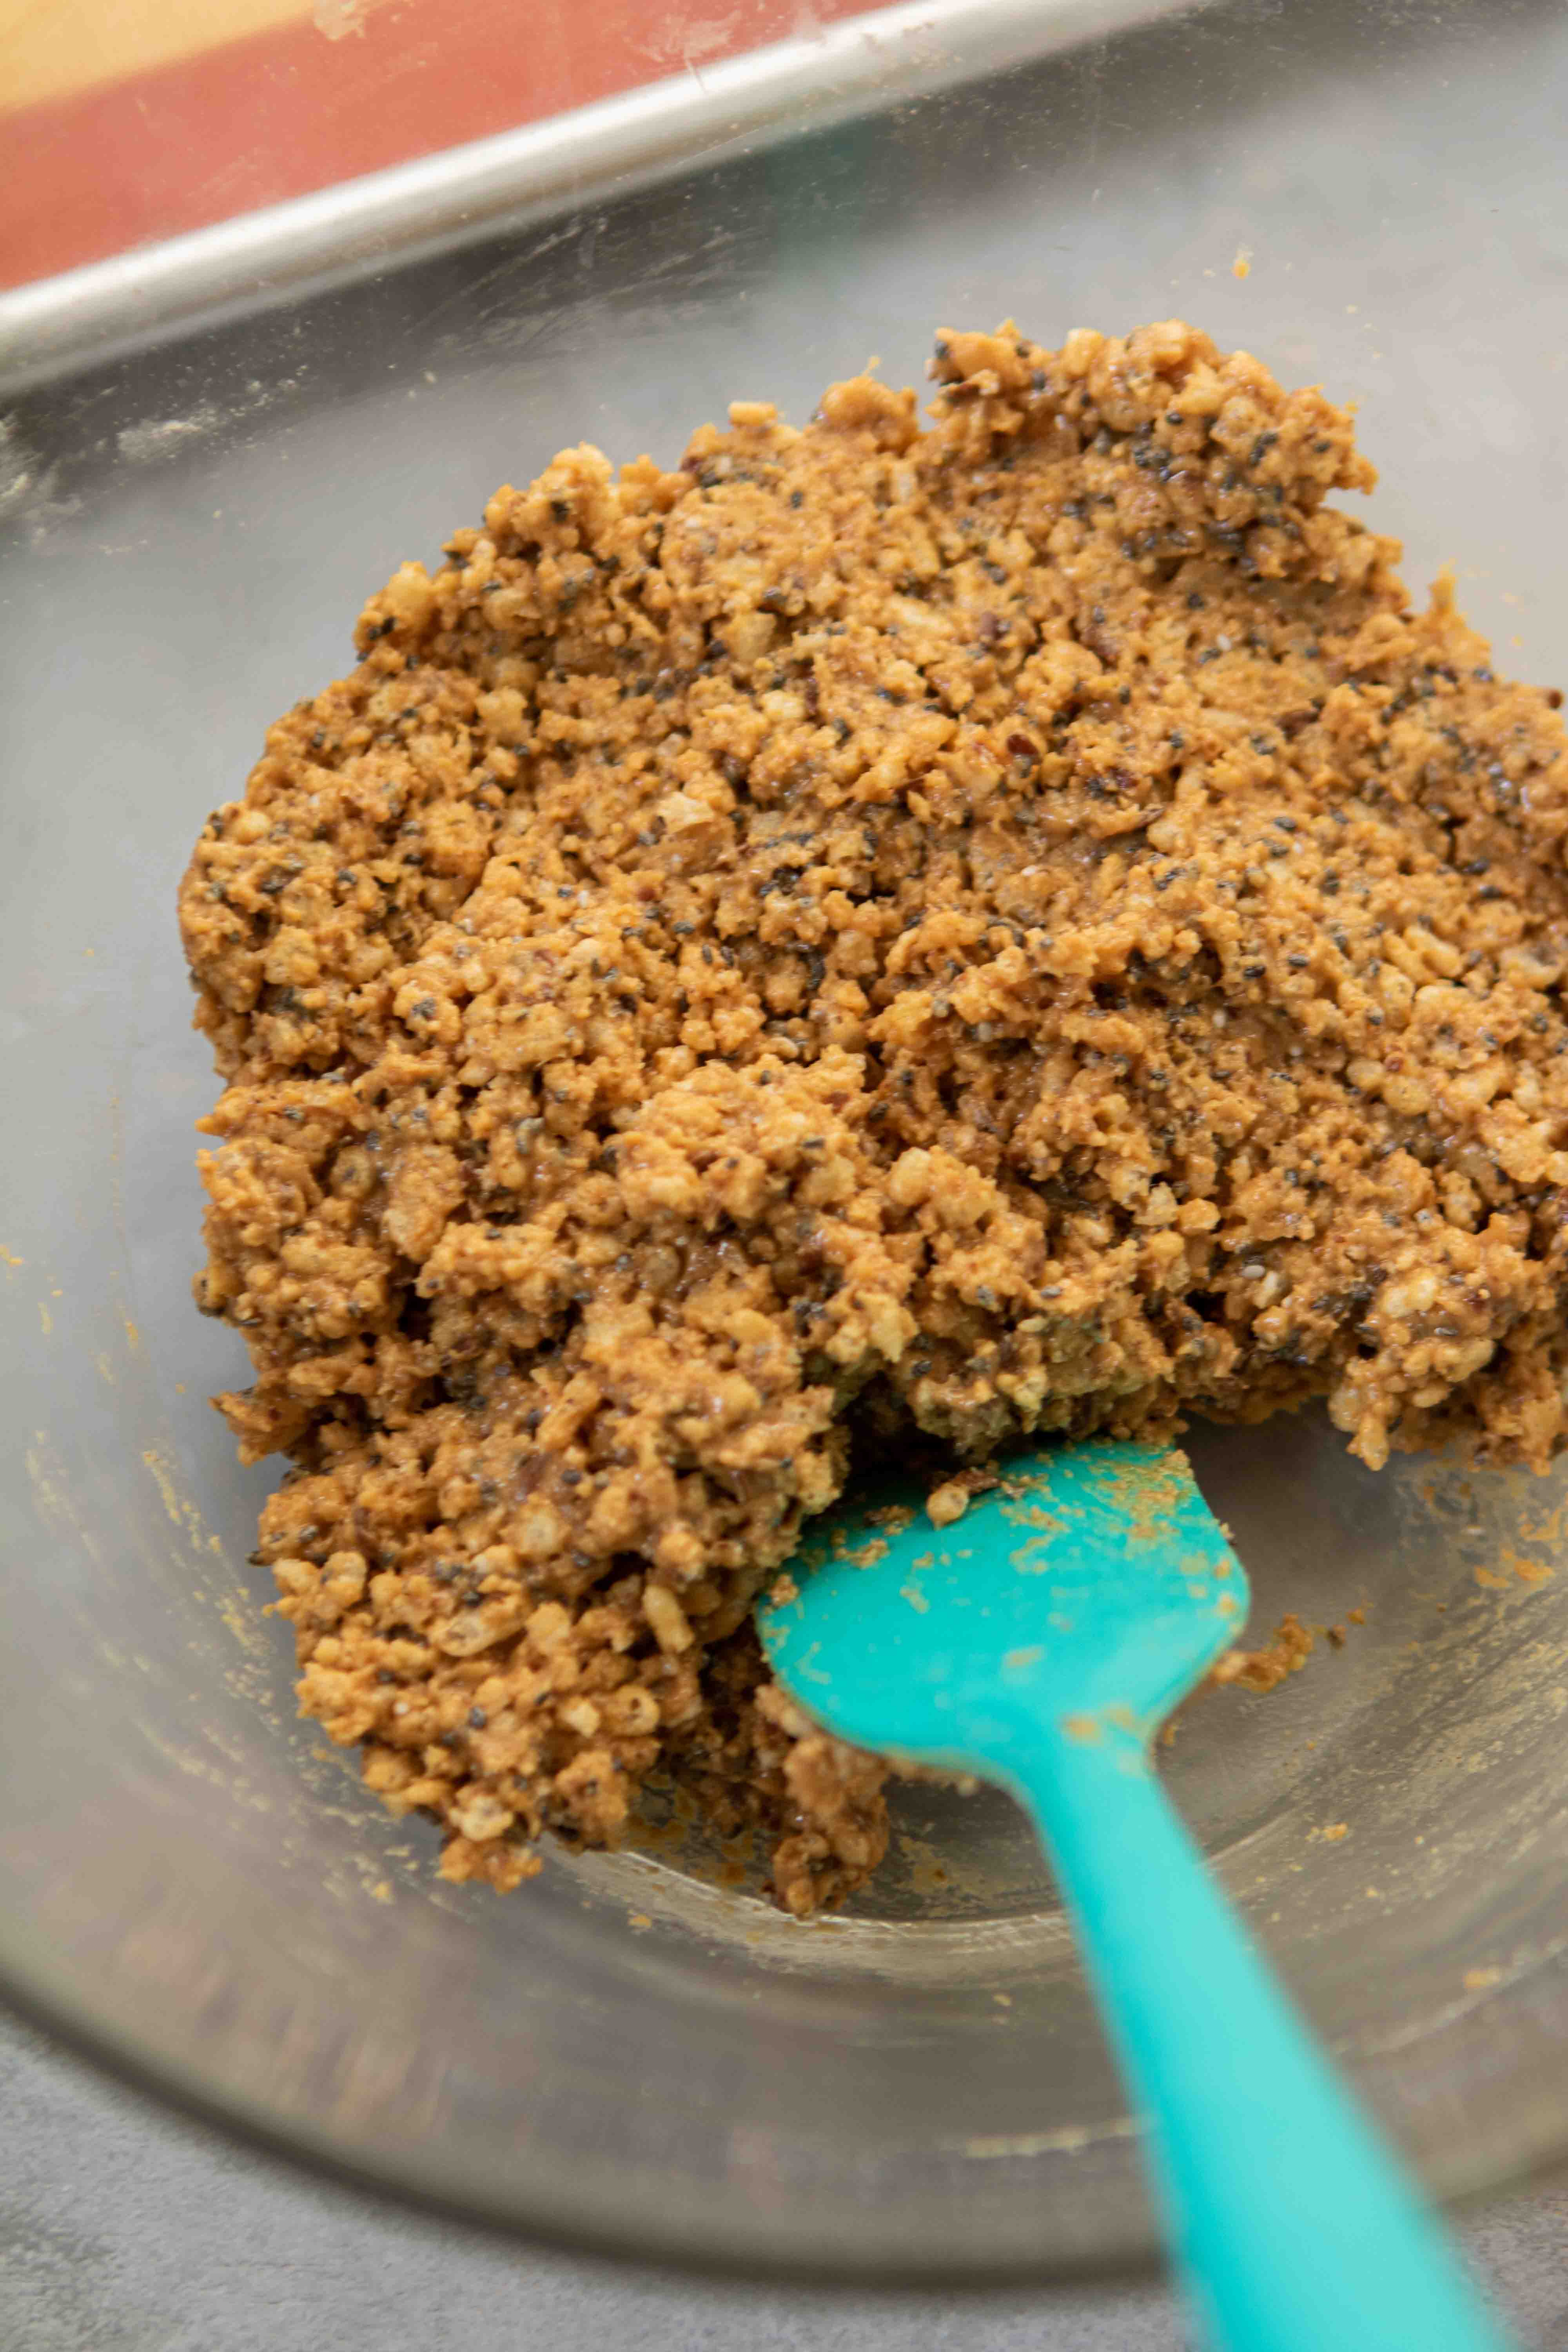 Close up of peanut butter rice cereal mixture